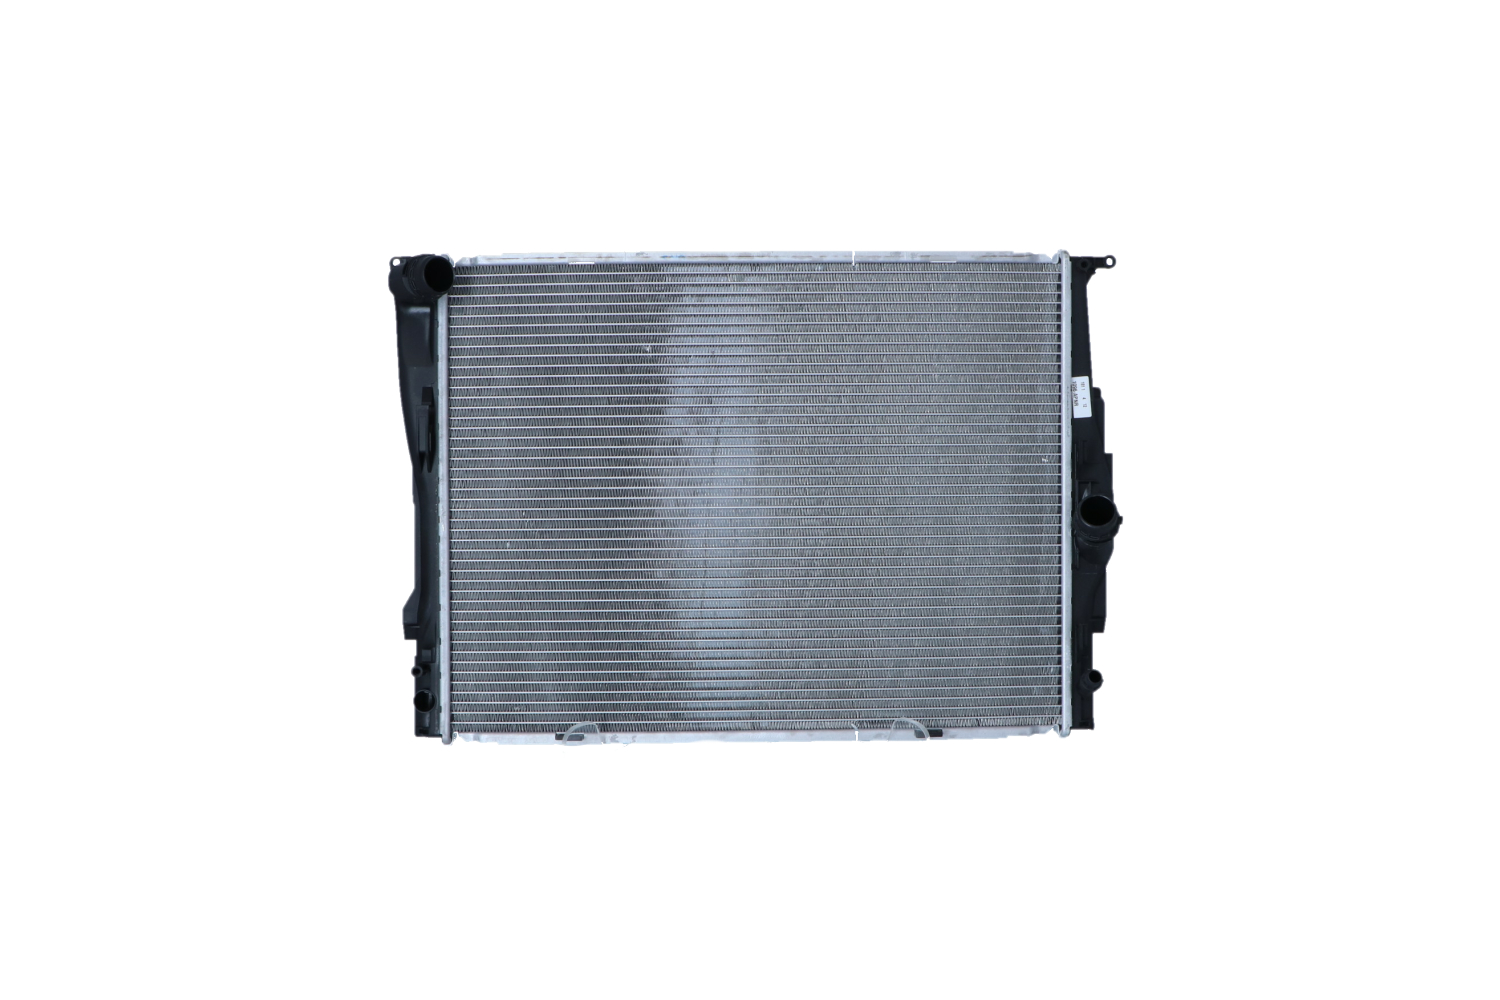 NRF EASY FIT Aluminium, 600 x 458 x 32 mm, with mounting parts, Brazed cooling fins Radiator 53474 buy